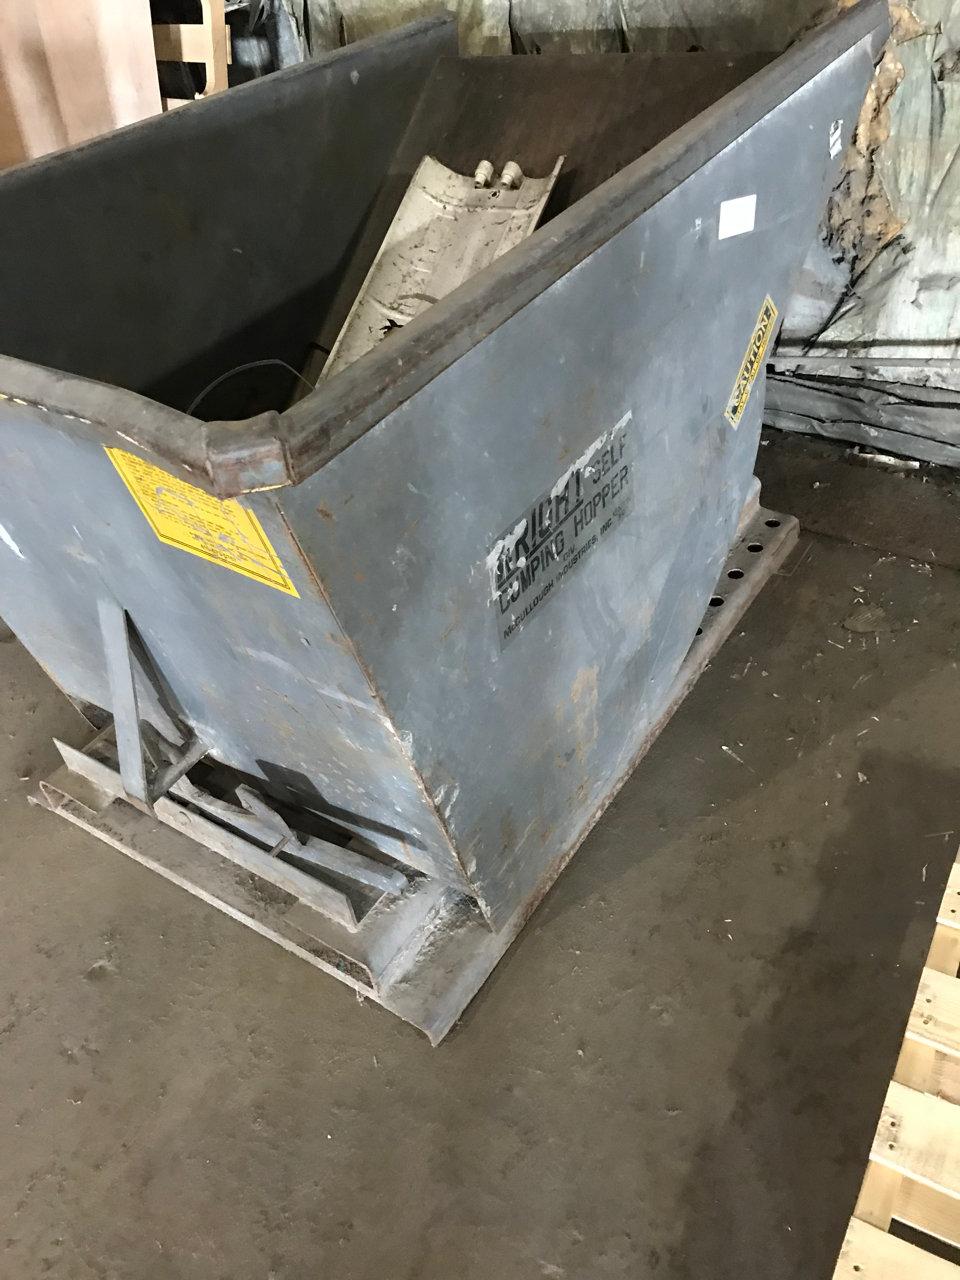 Wright Industrial Tipping Dumpster made to be raised with a forklift and dumped